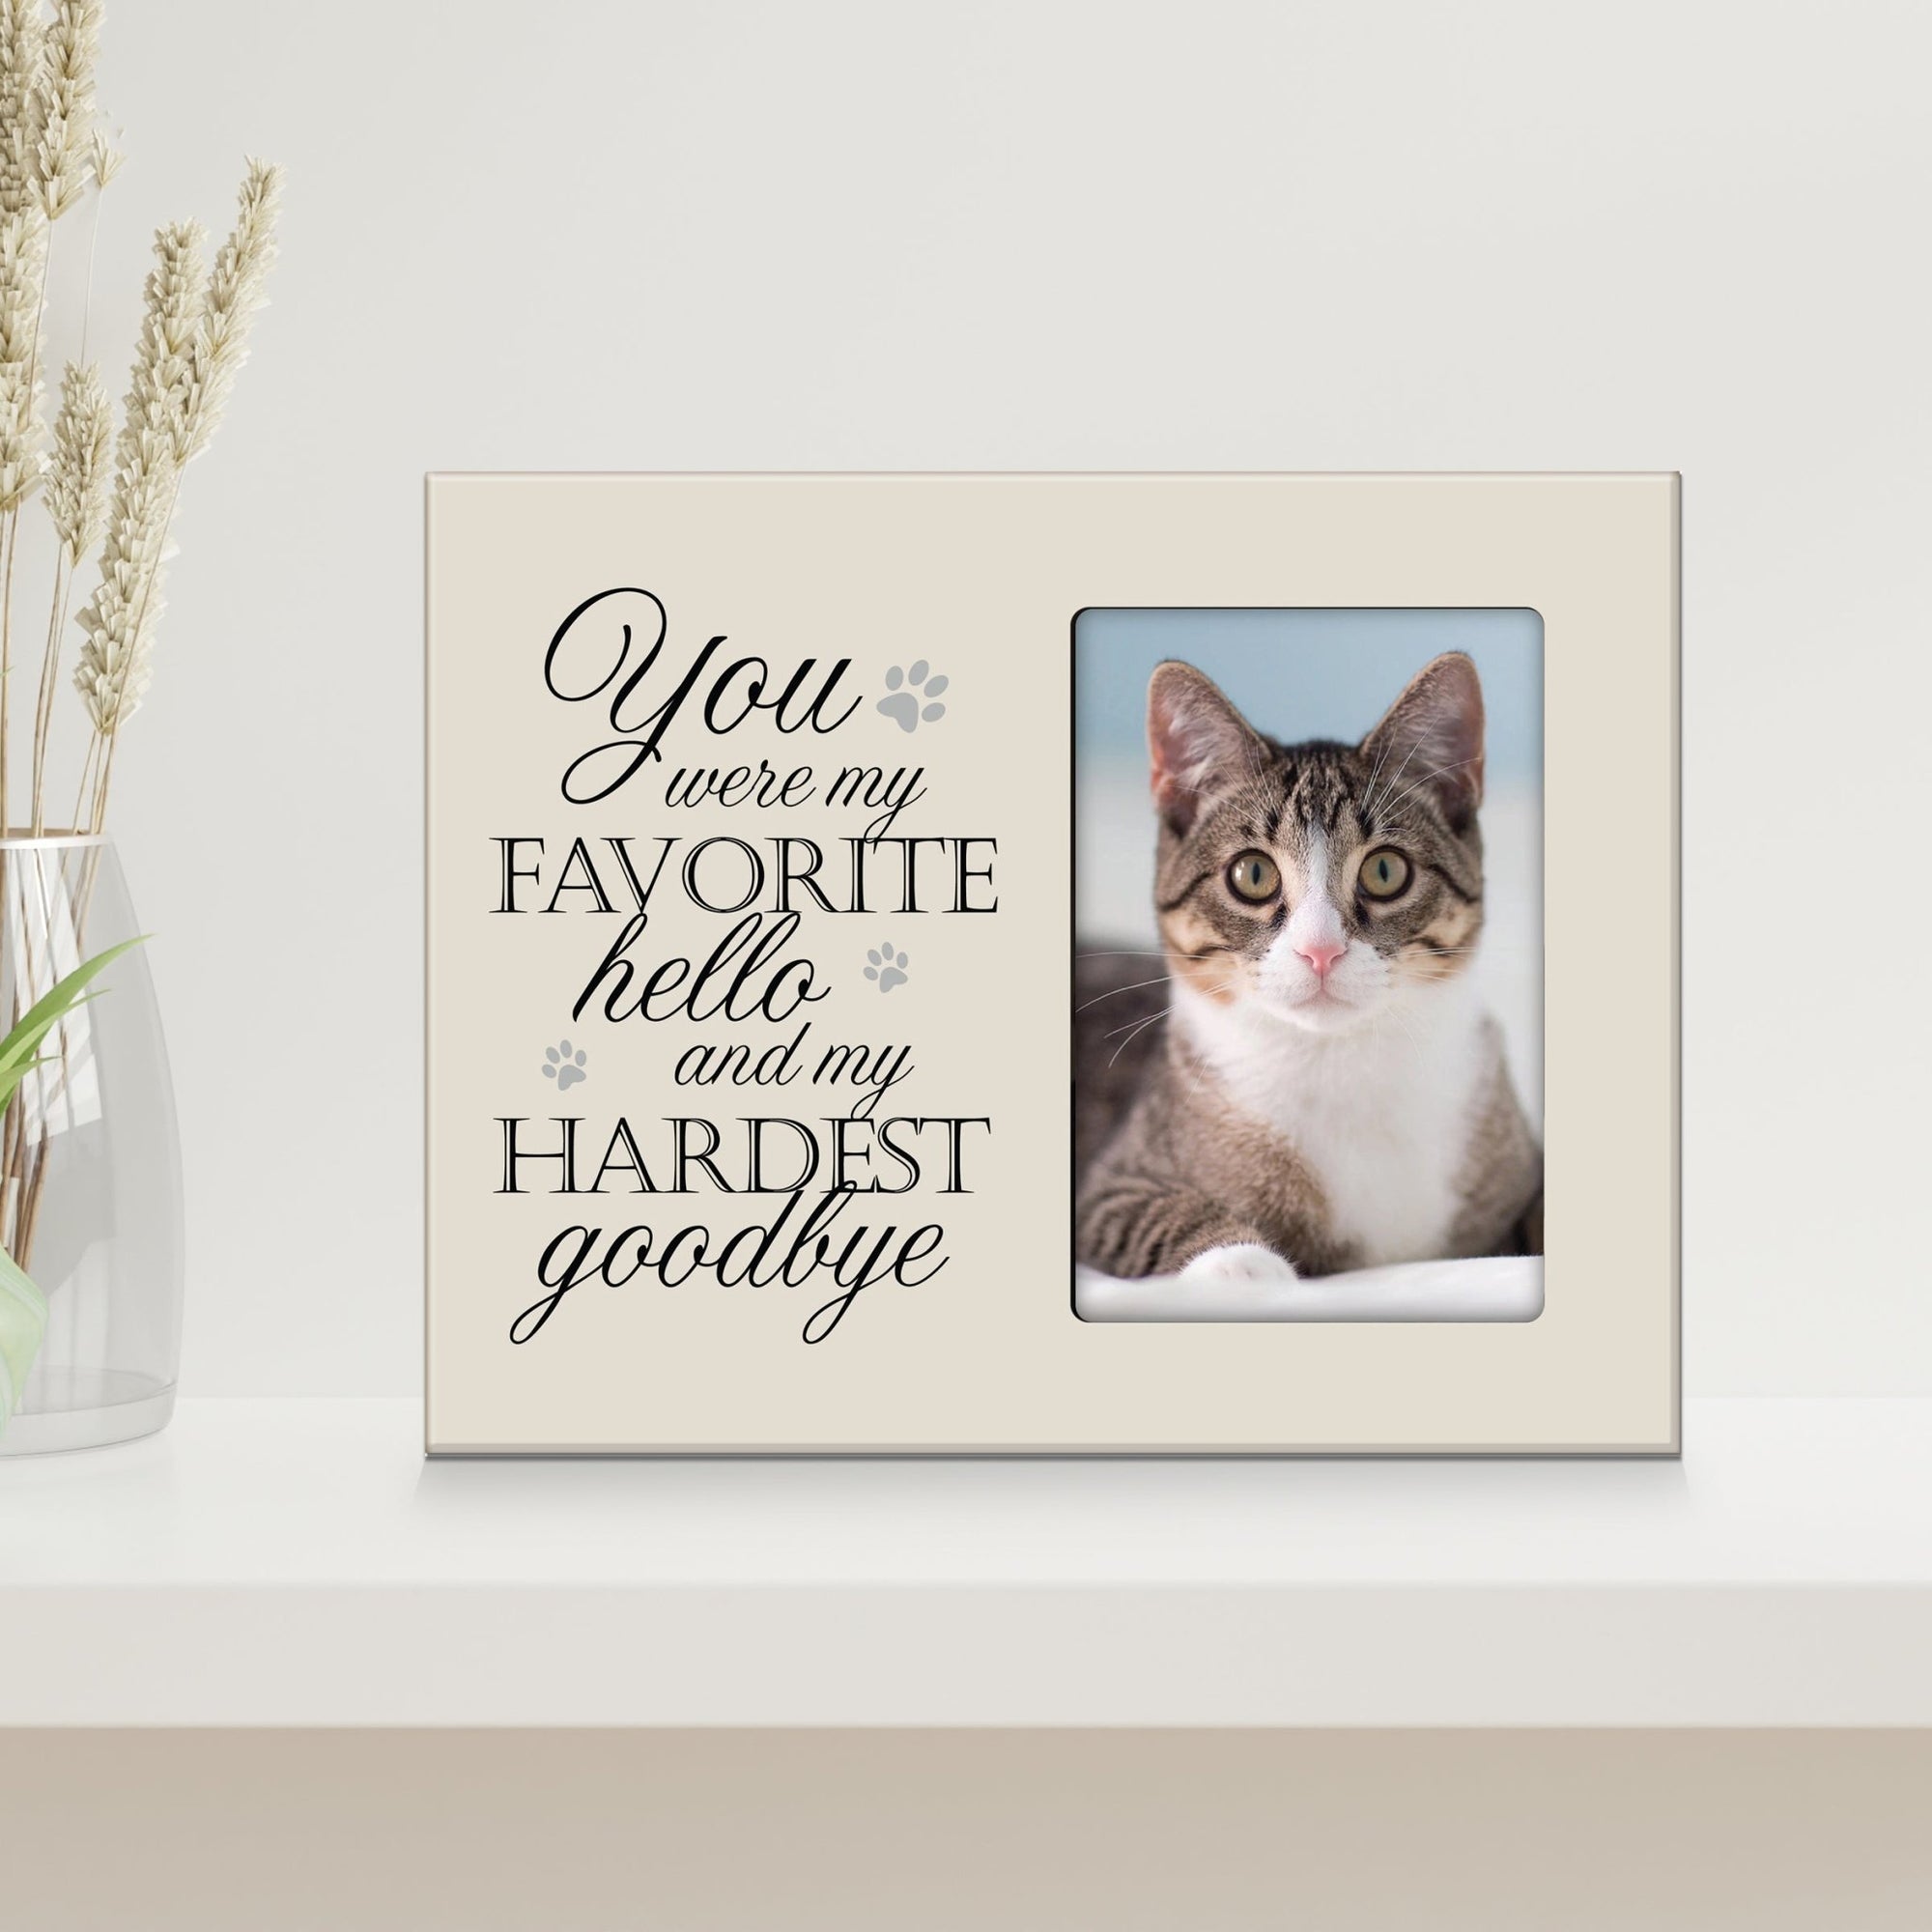 Rustic-Inspired Wooden Pet Memorial Frames That Holds A 4x6in Photo - You Were My Favorite (Paws) - LifeSong Milestones